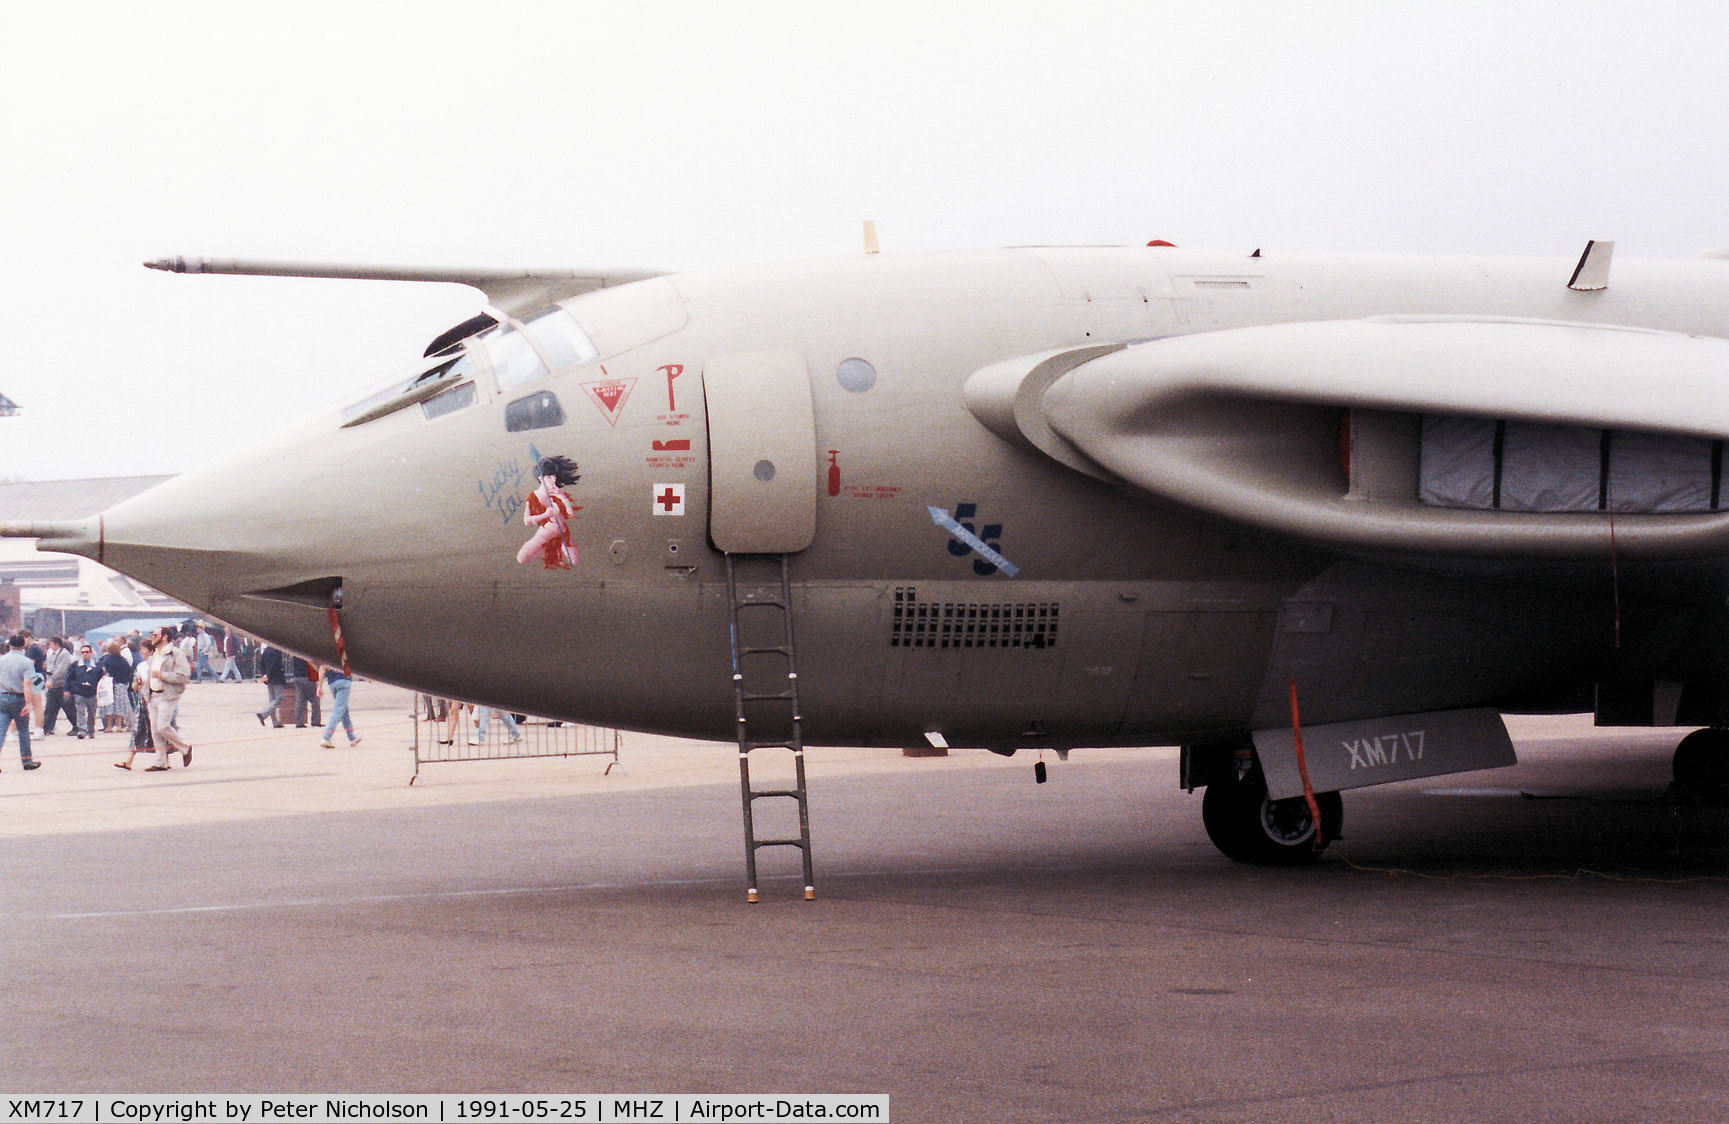 XM717, 1963 Handley Page Victor K.2 C/N HP80/85, Lucky Lou nose-art Desert Storm markings on this Victor K.2 of 55 Squadron at RAF Marham on display at the 1991 Mildenhall Air Fete.